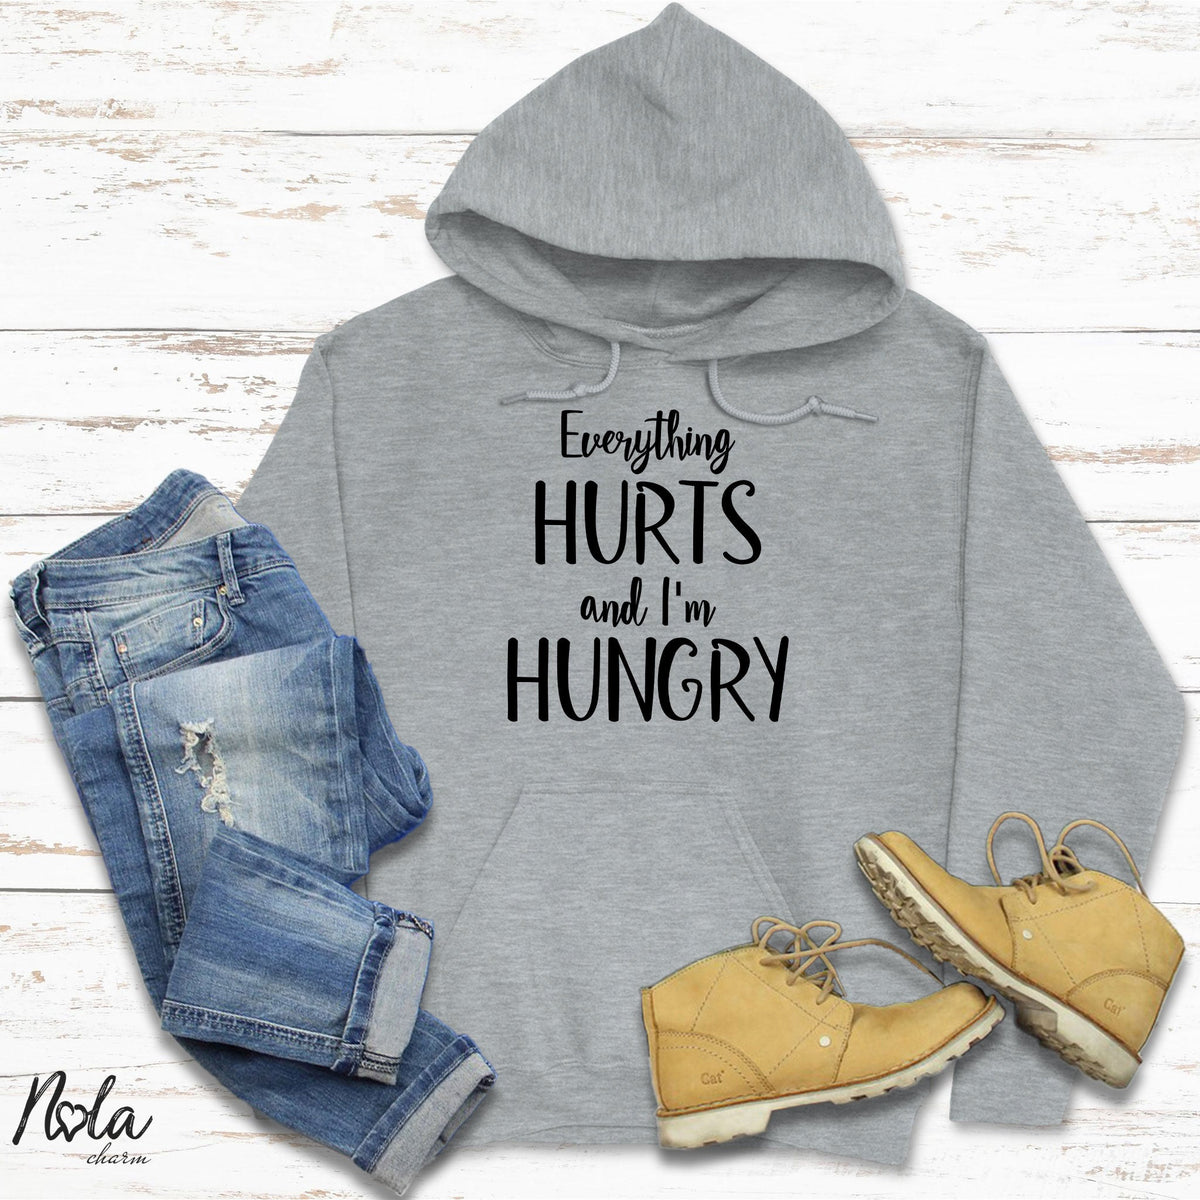 Everything Hurts and I'm Hungry - Nola Charm